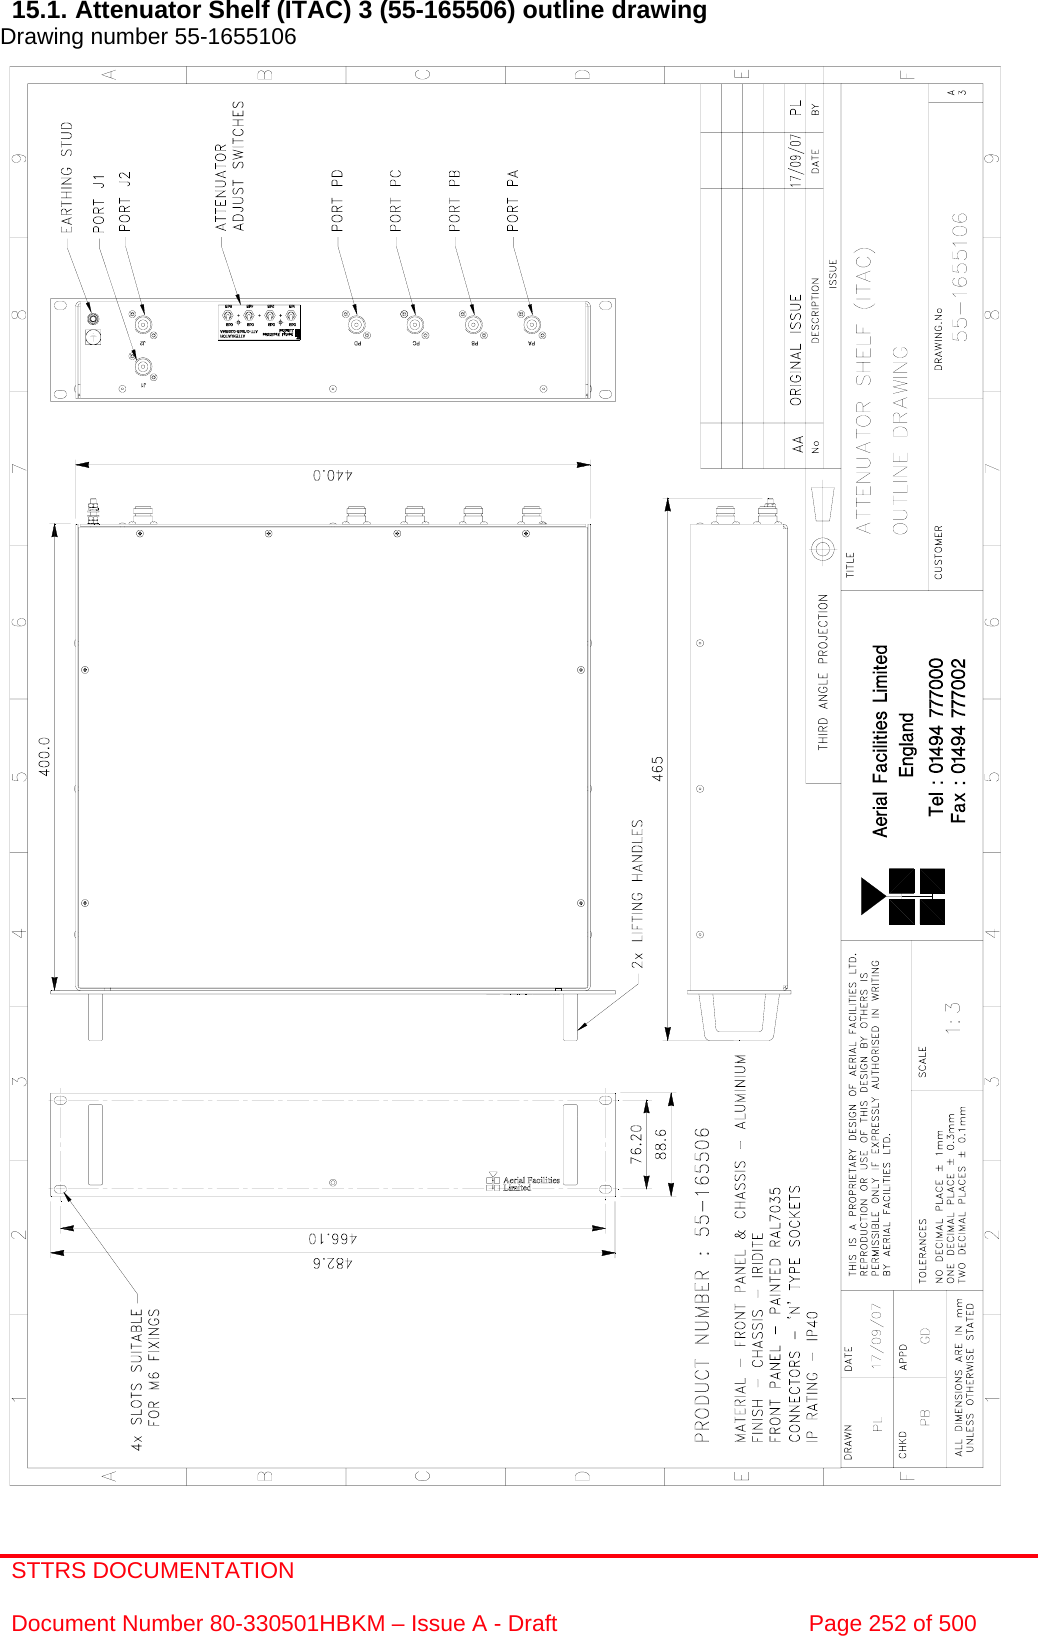 STTRS DOCUMENTATION  Document Number 80-330501HBKM – Issue A - Draft  Page 252 of 500   15.1. Attenuator Shelf (ITAC) 3 (55-165506) outline drawing  Drawing number 55-1655106                                                     